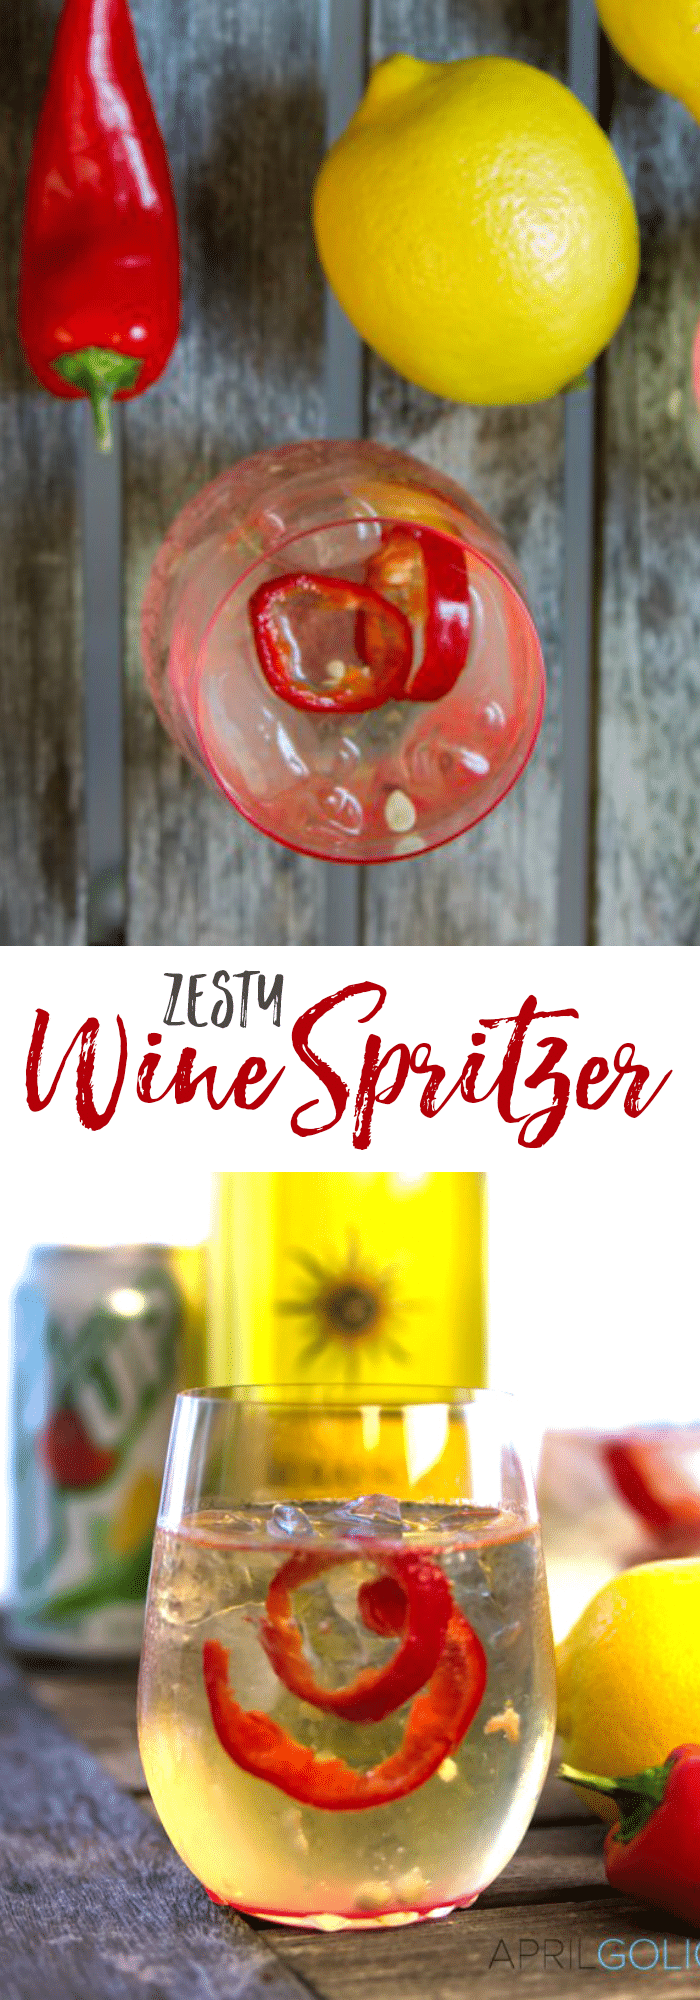 Easy Zesty White Wine Spritzer Recipe with Mirrasou Chardonnay, sprite, red chili peppers, and lemon making it a little spicy 